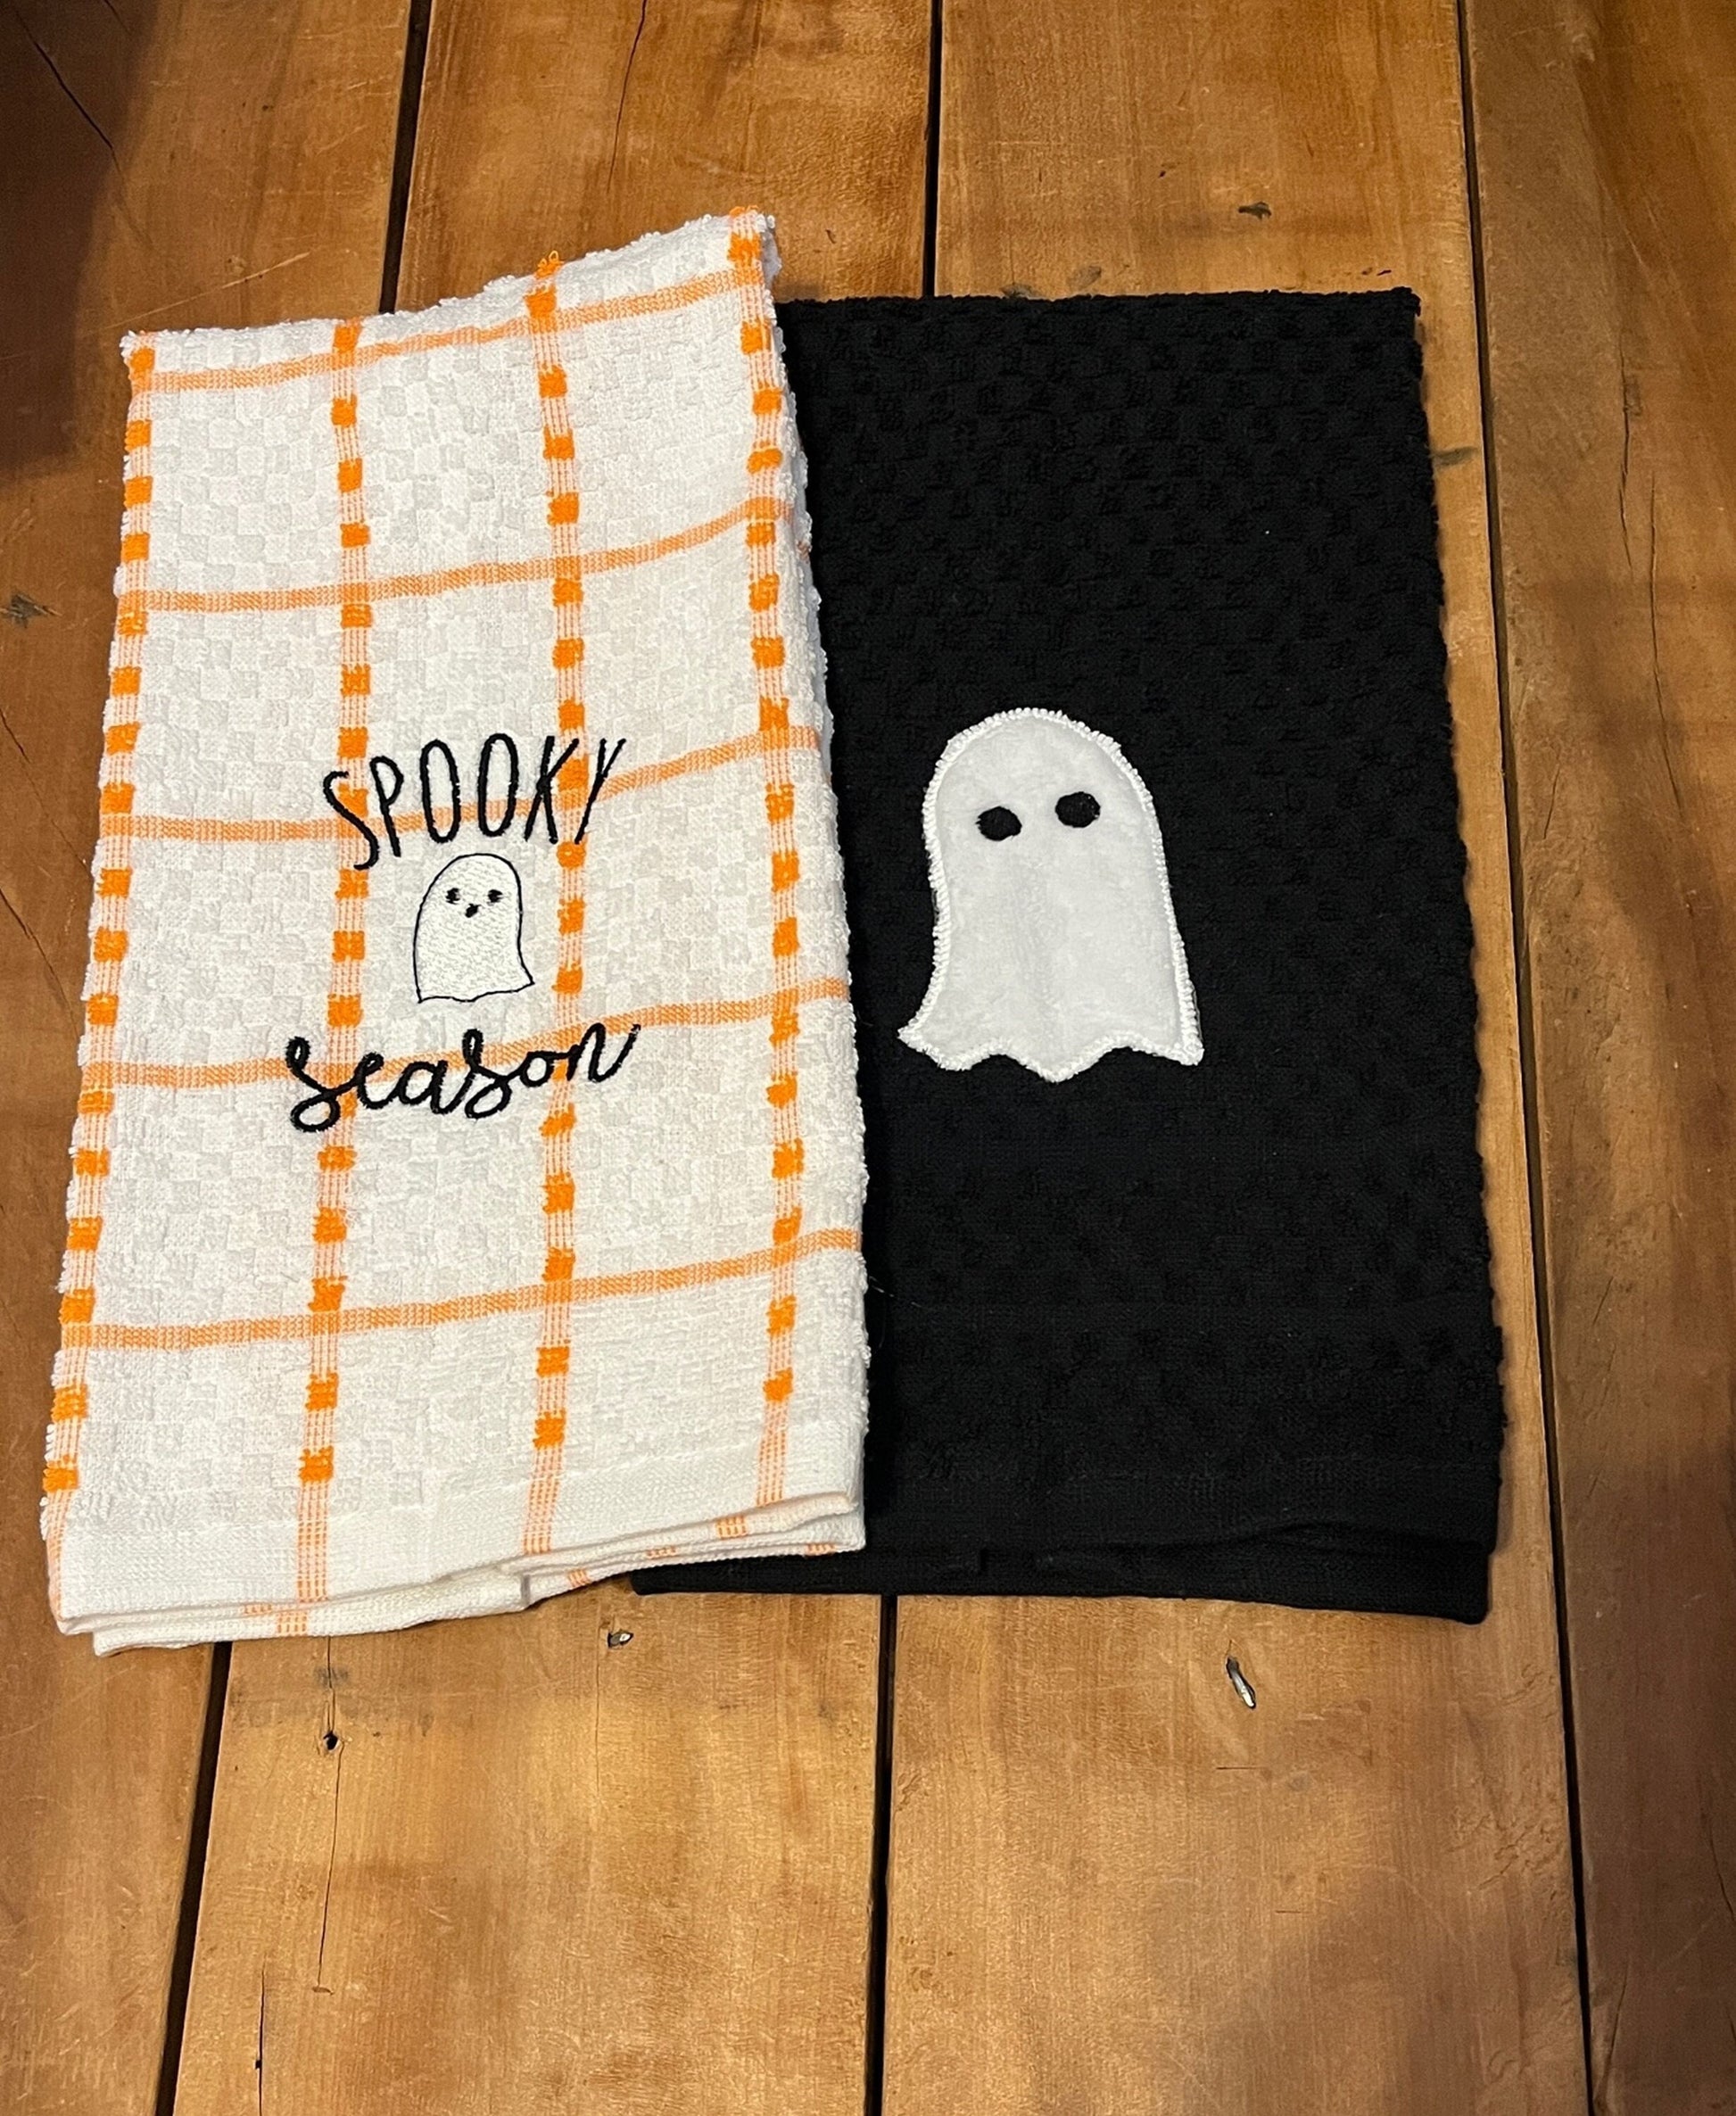 embroidered spooky season kitchen towel & Black towel with embroidered ghost